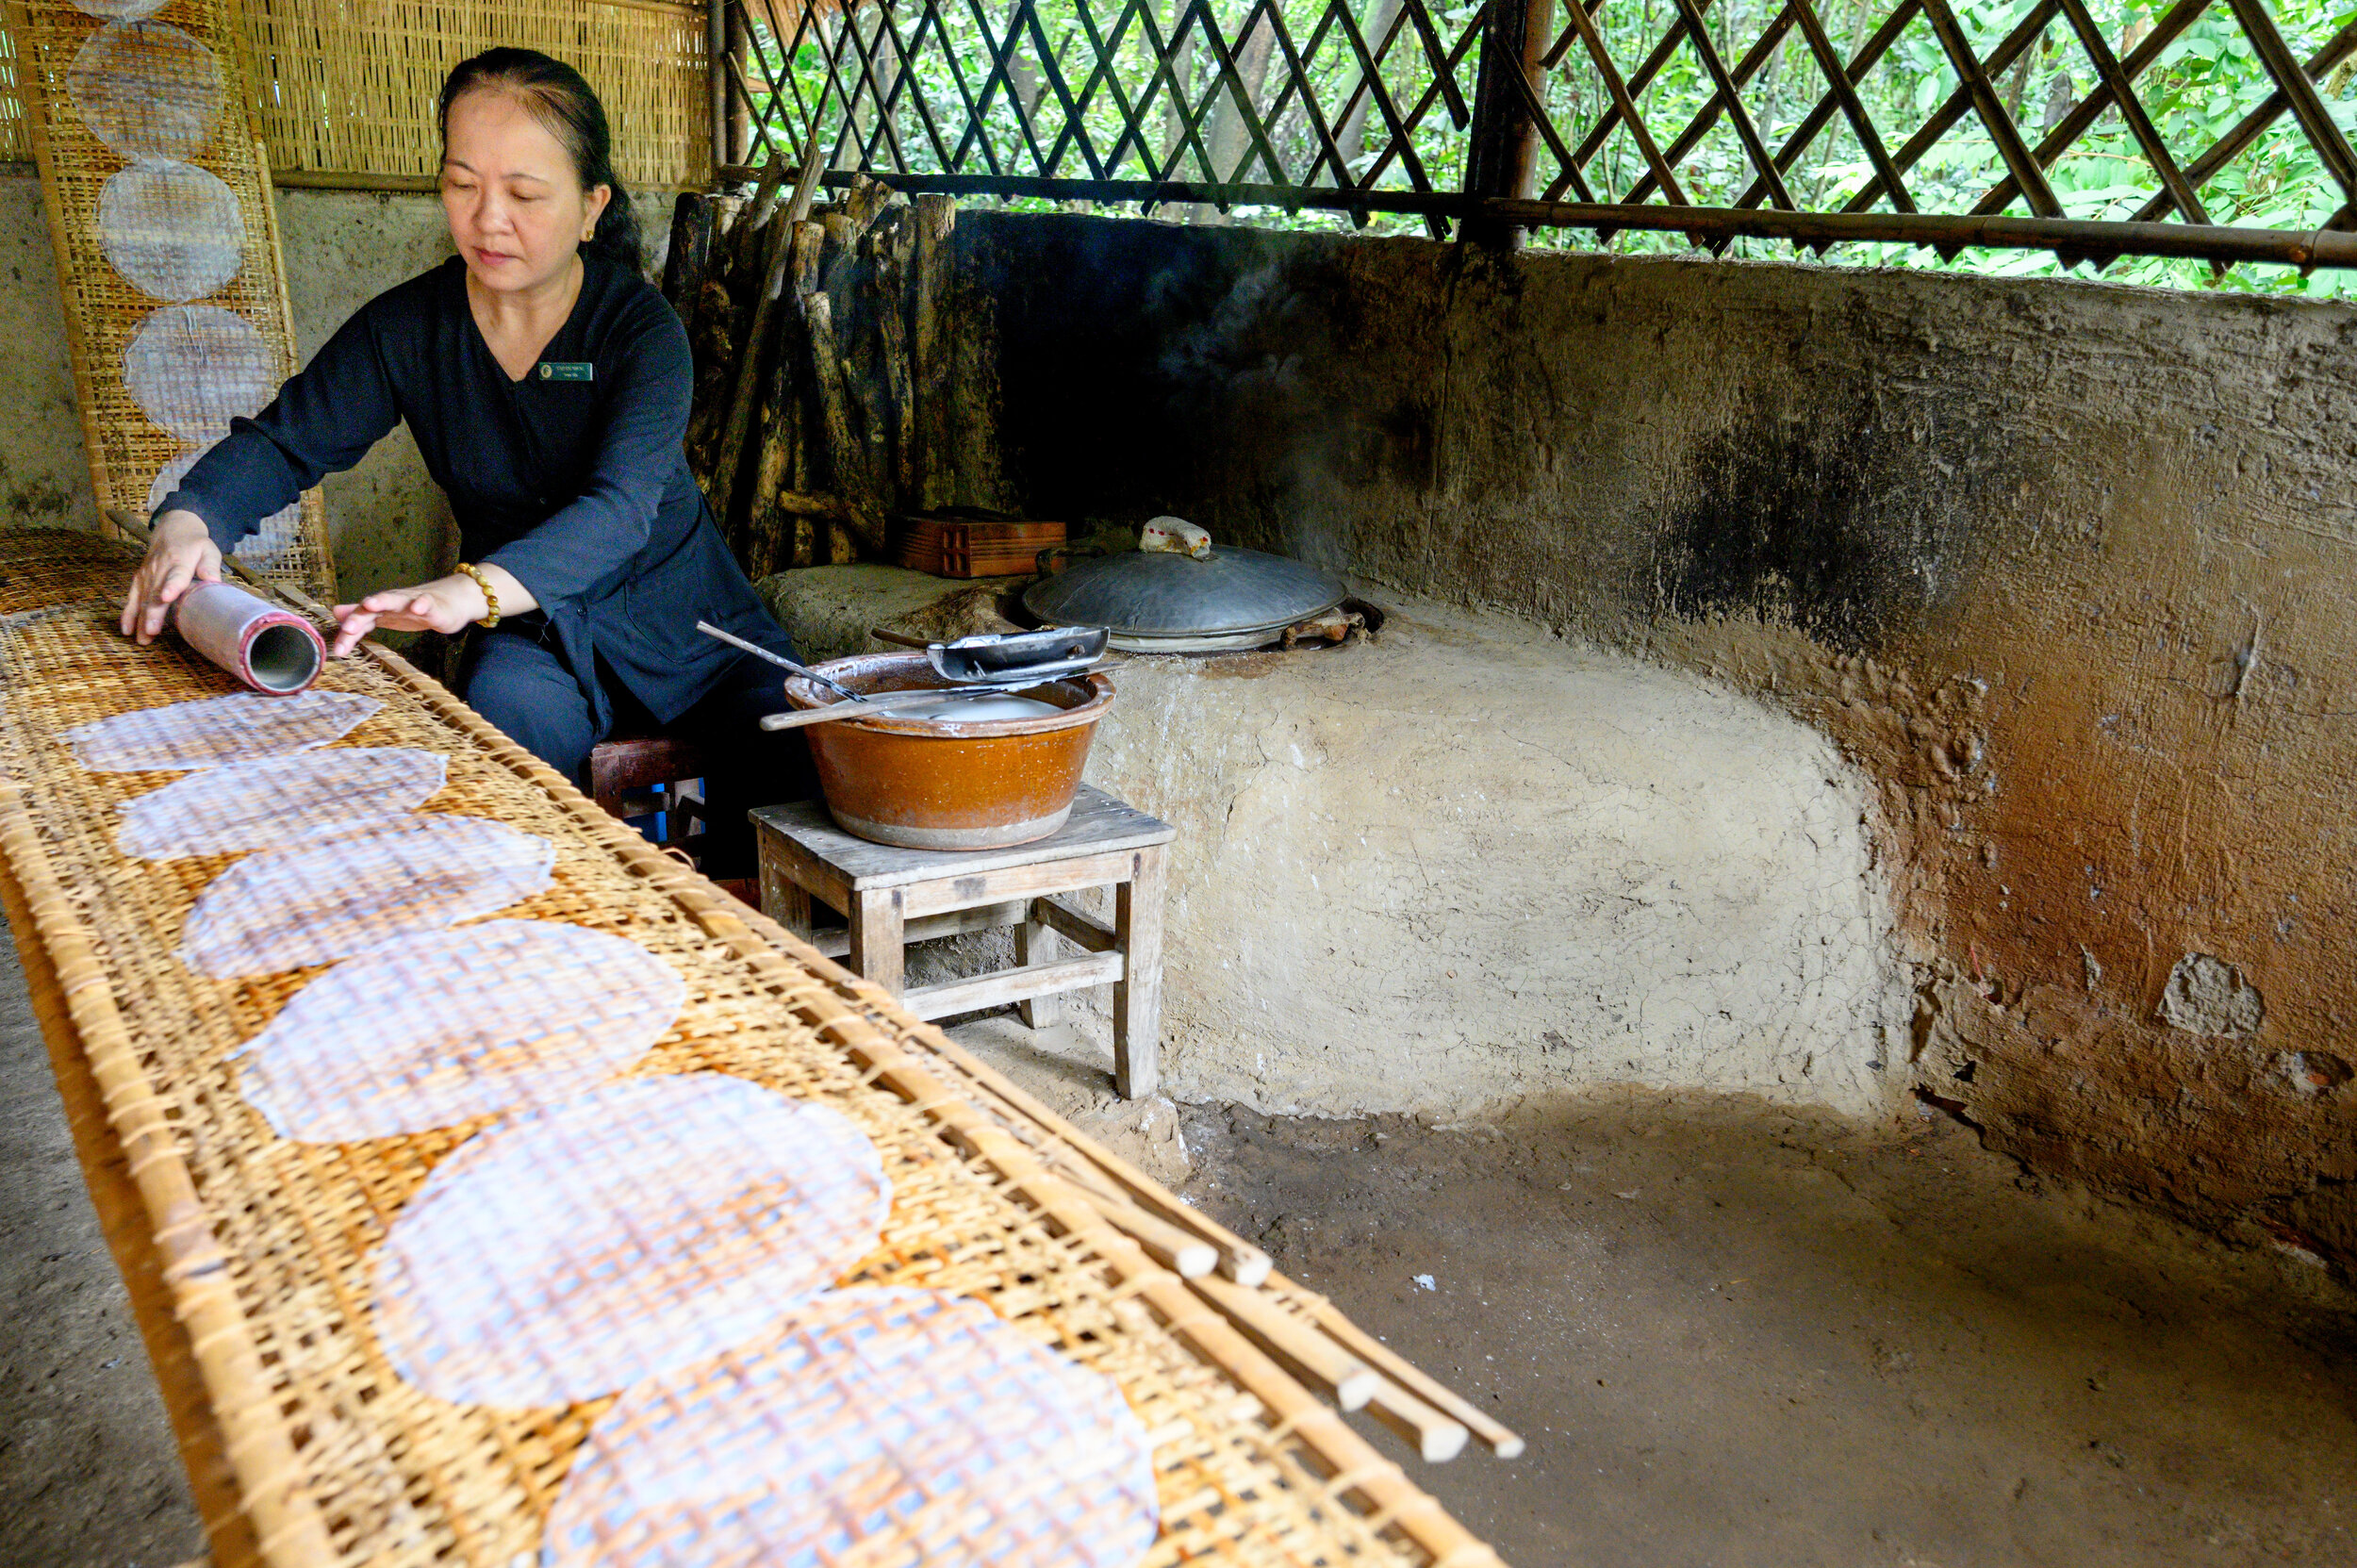 A women demonstrates rice paper wraps